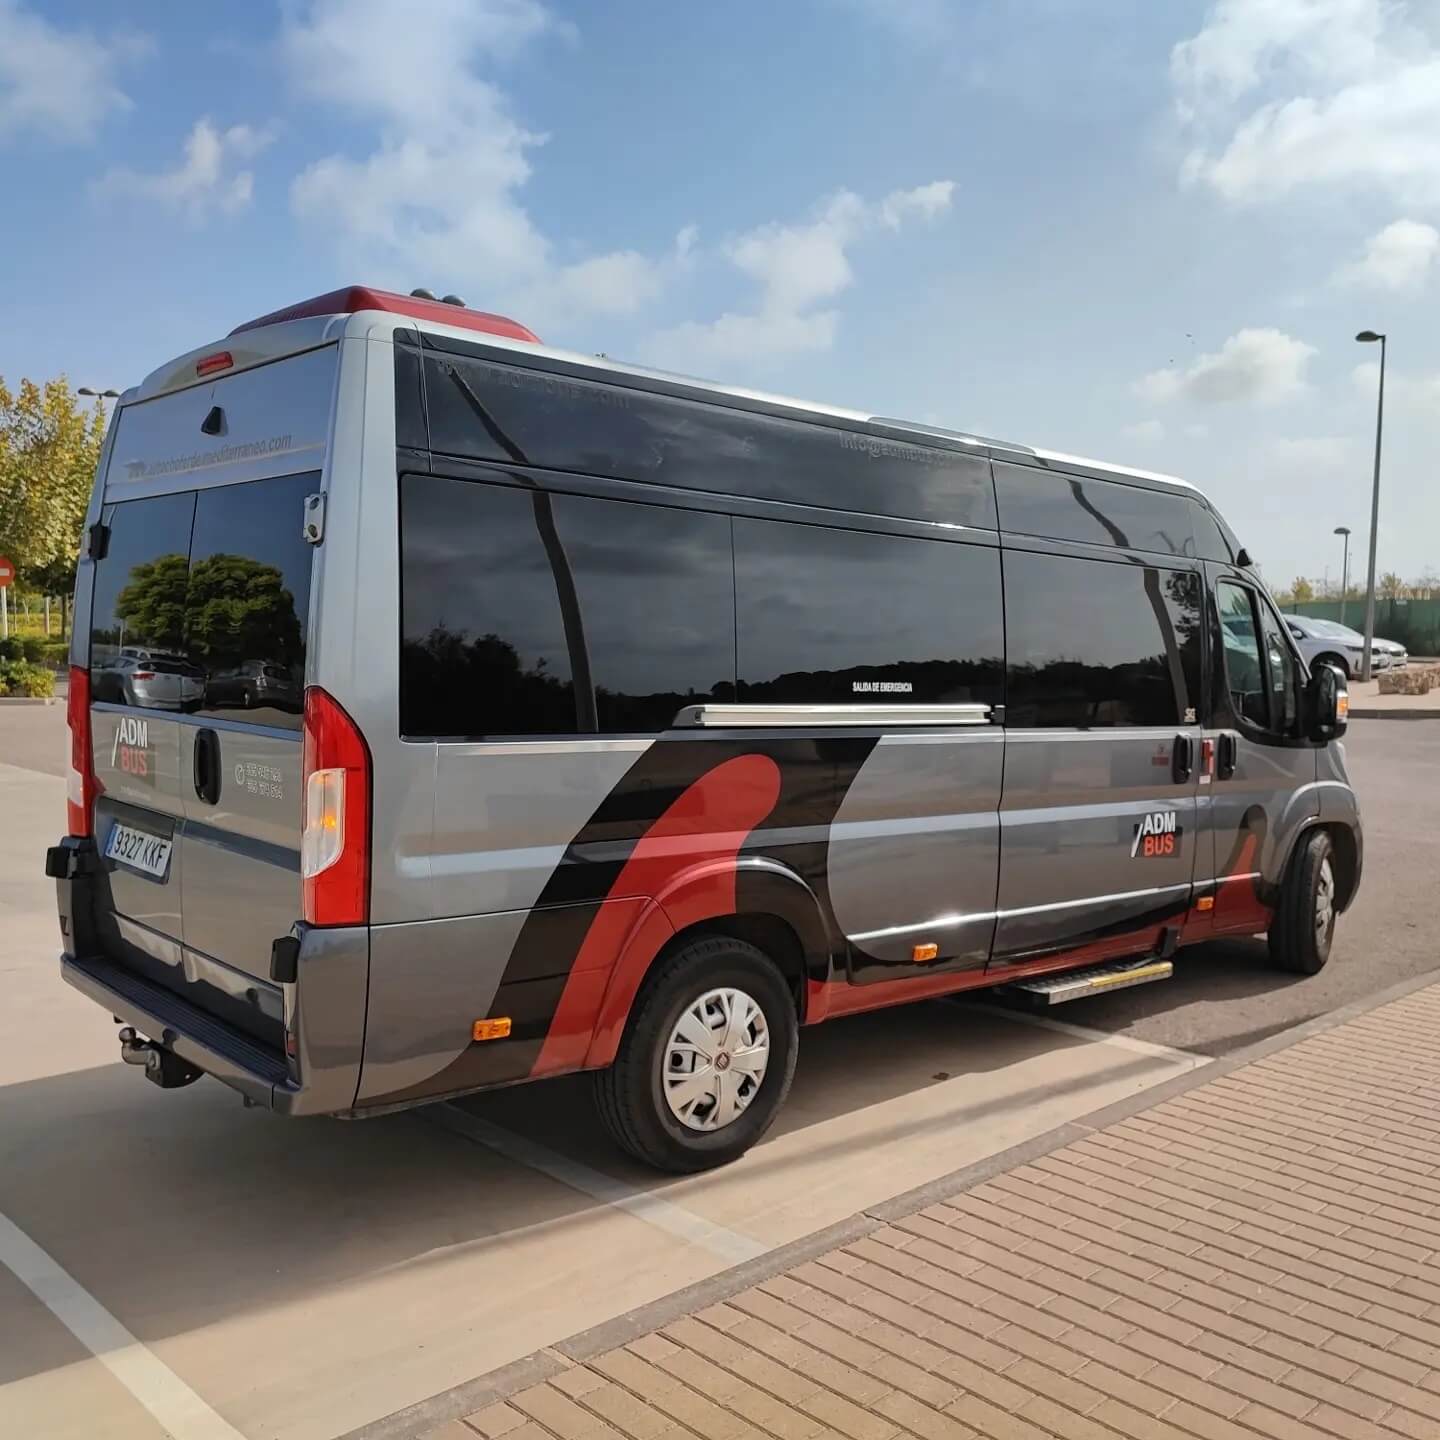 Hire a 13 seater Microbus (PEUGEOT BOXER MINIBUS 2004) from AUTOCHOFER DEL MEDITERRANEO, S.L. in SAN JAVIER 